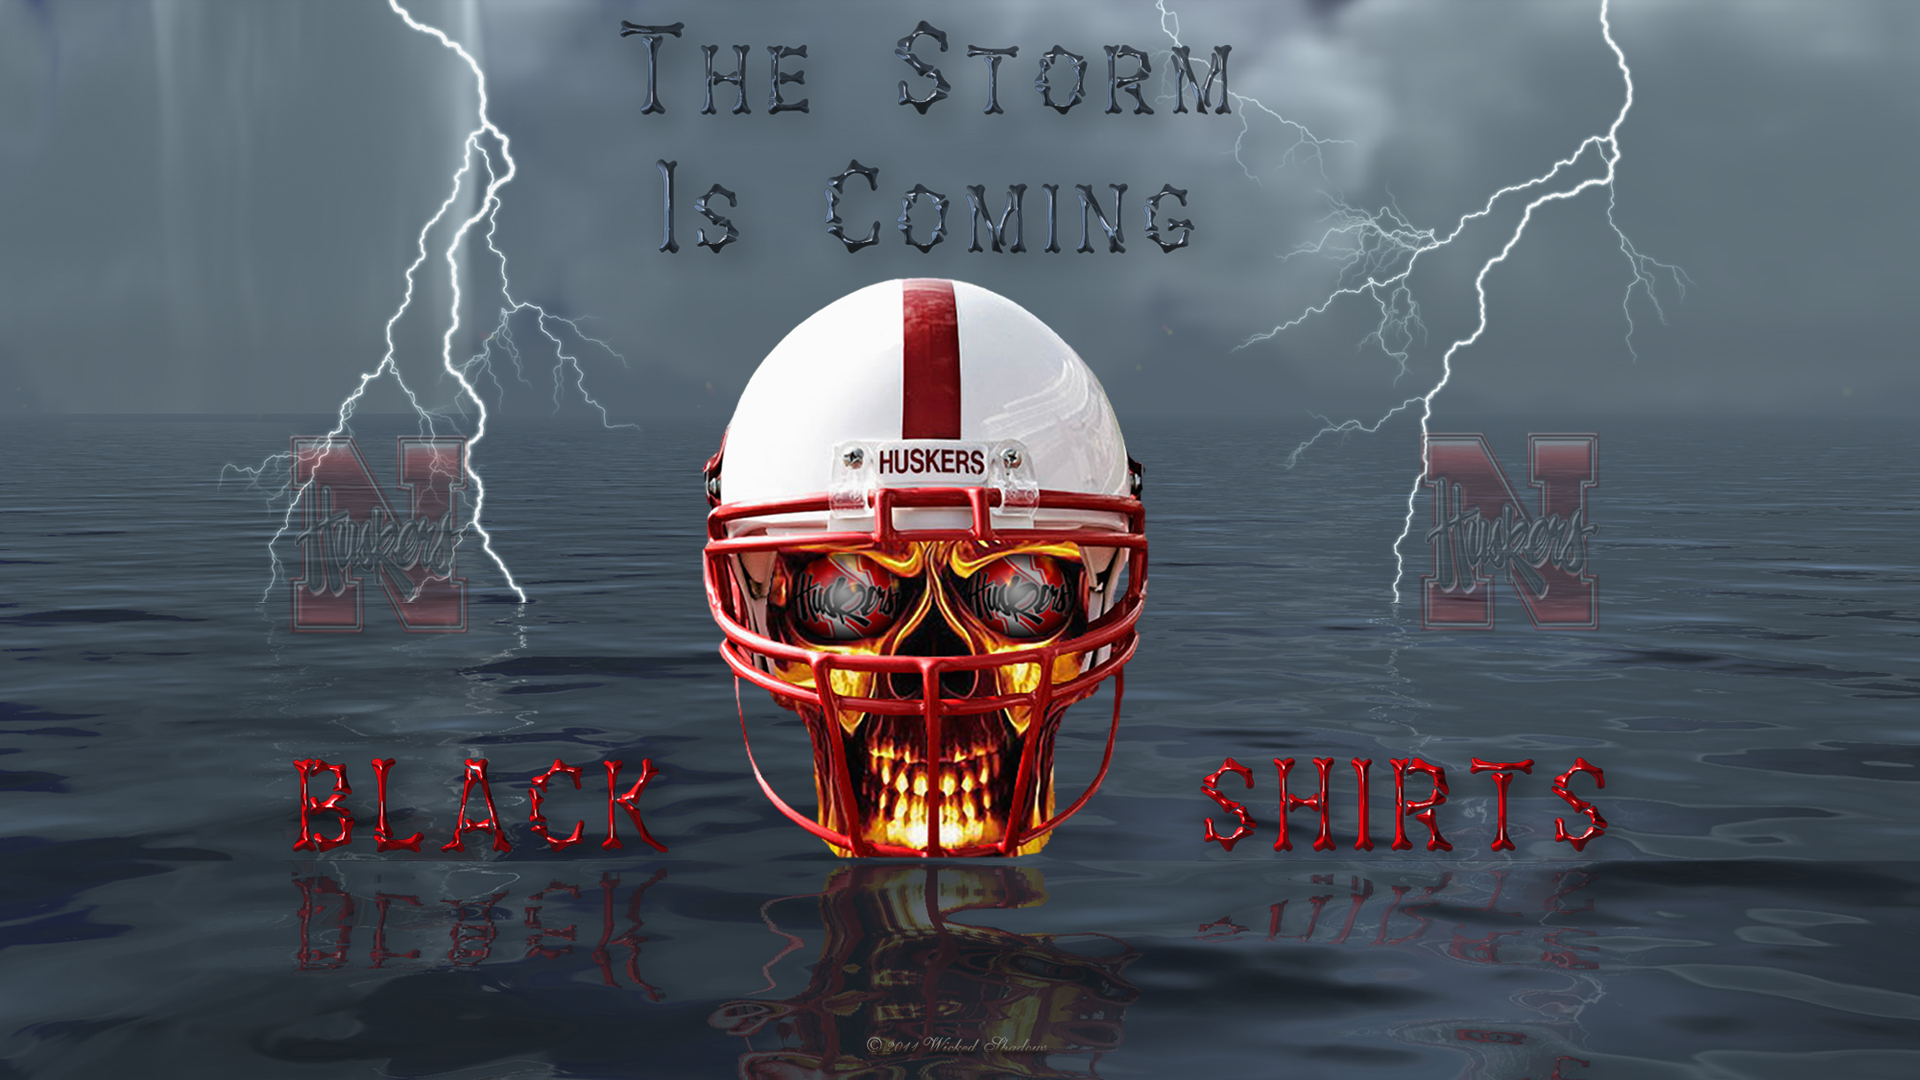 Download Wallpapers By Wicked Shadows: Blackshirts The Storm Is ...